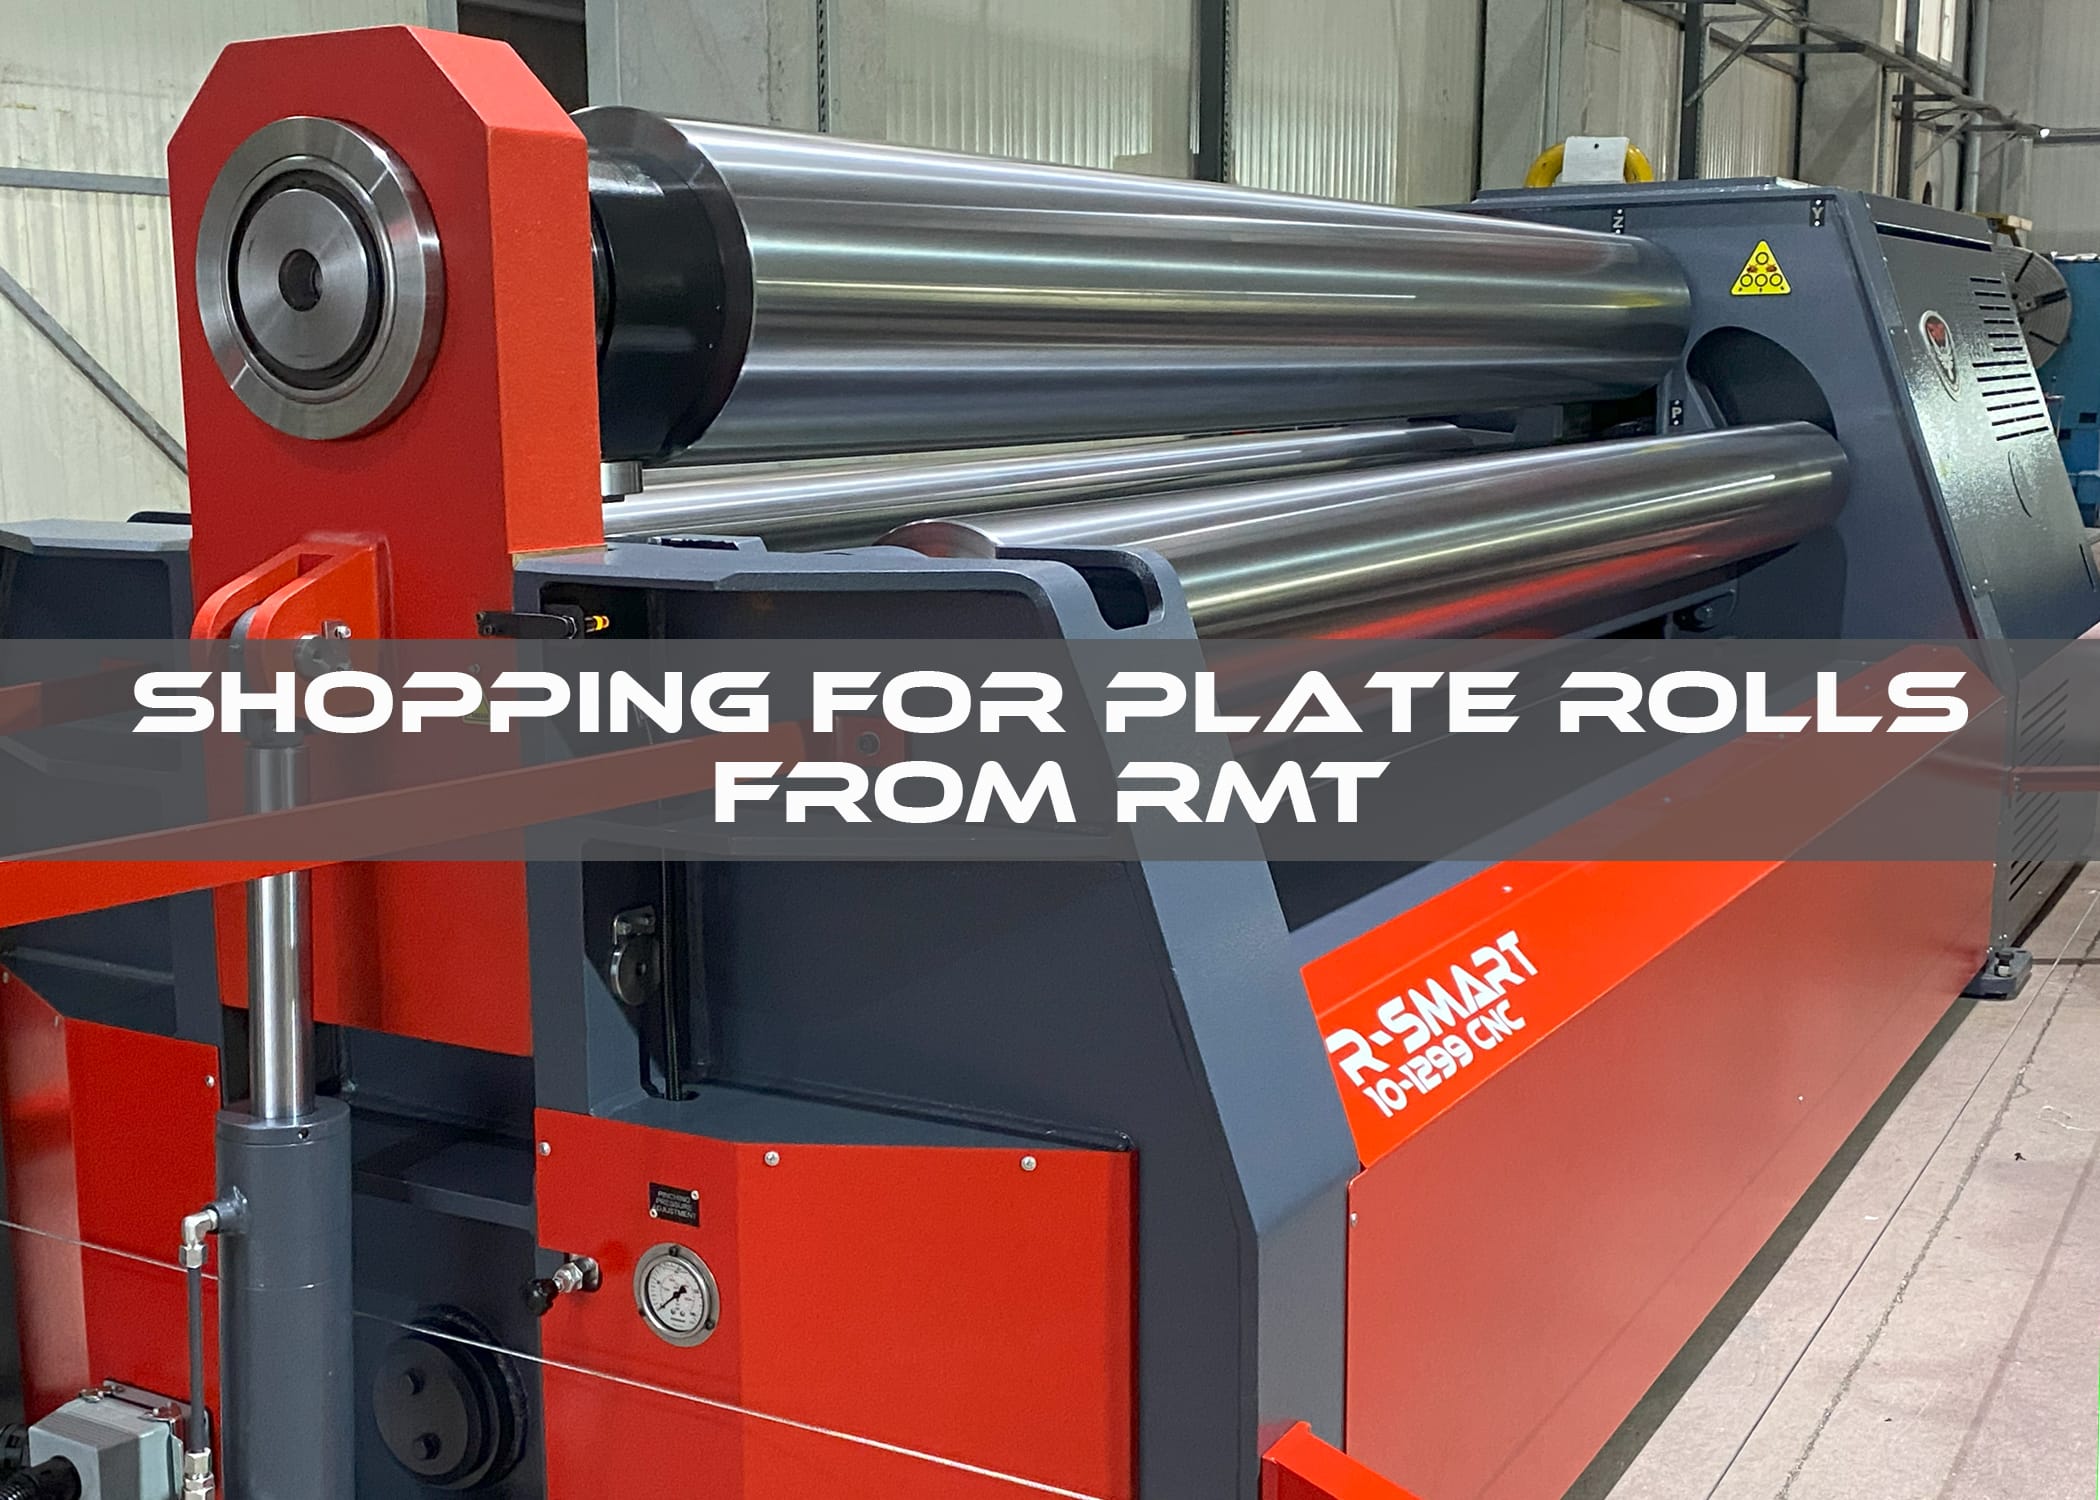 Shopping for Plate Rolls from RMT